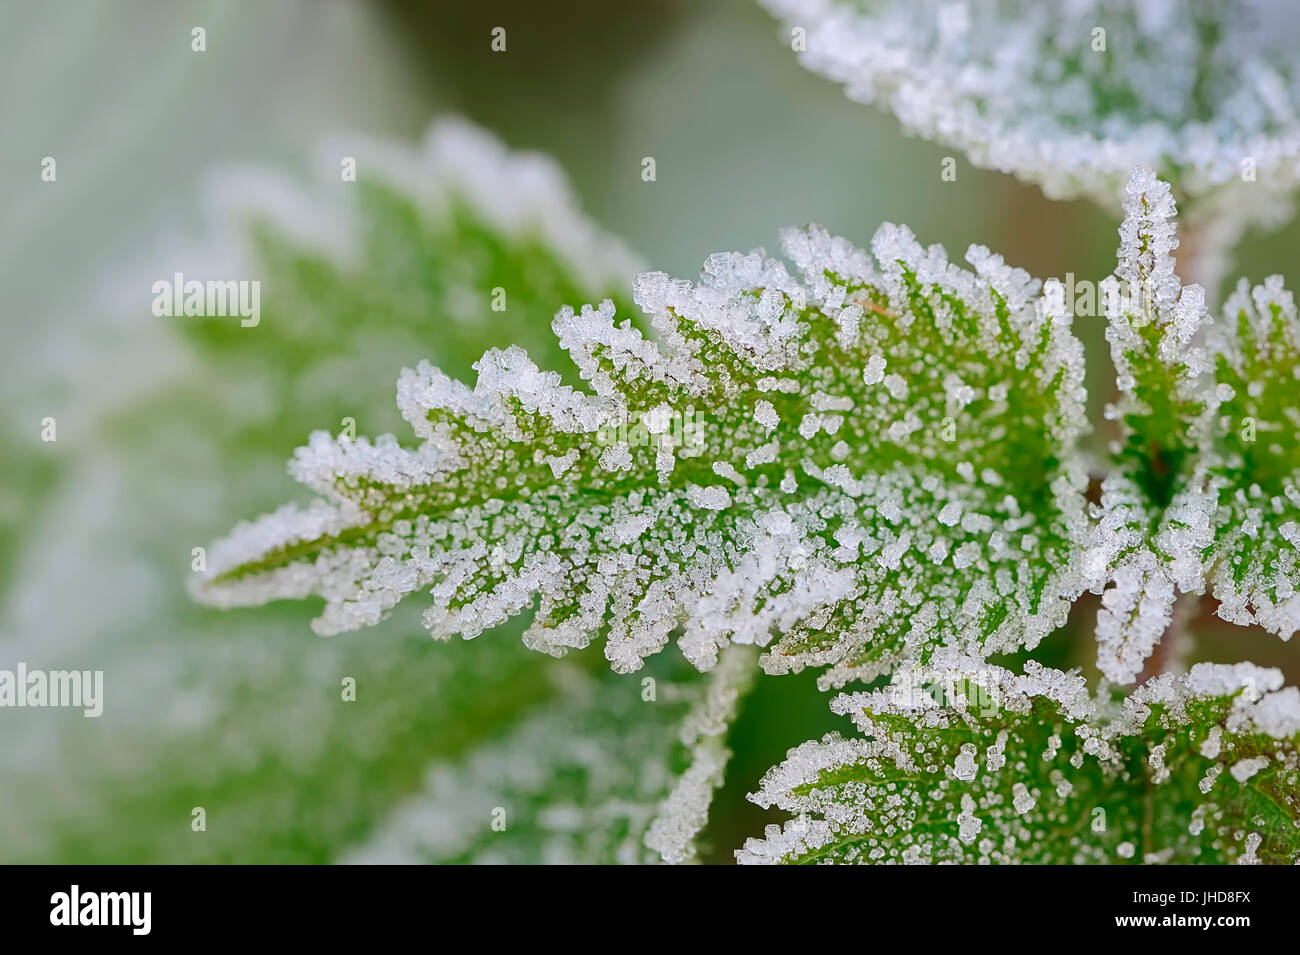 Common Nettle, leaf covered with hoarfrost, North Rhine-Westphalia, Germany / (Urtica dioica) / Stinging Nettle Stock Photo